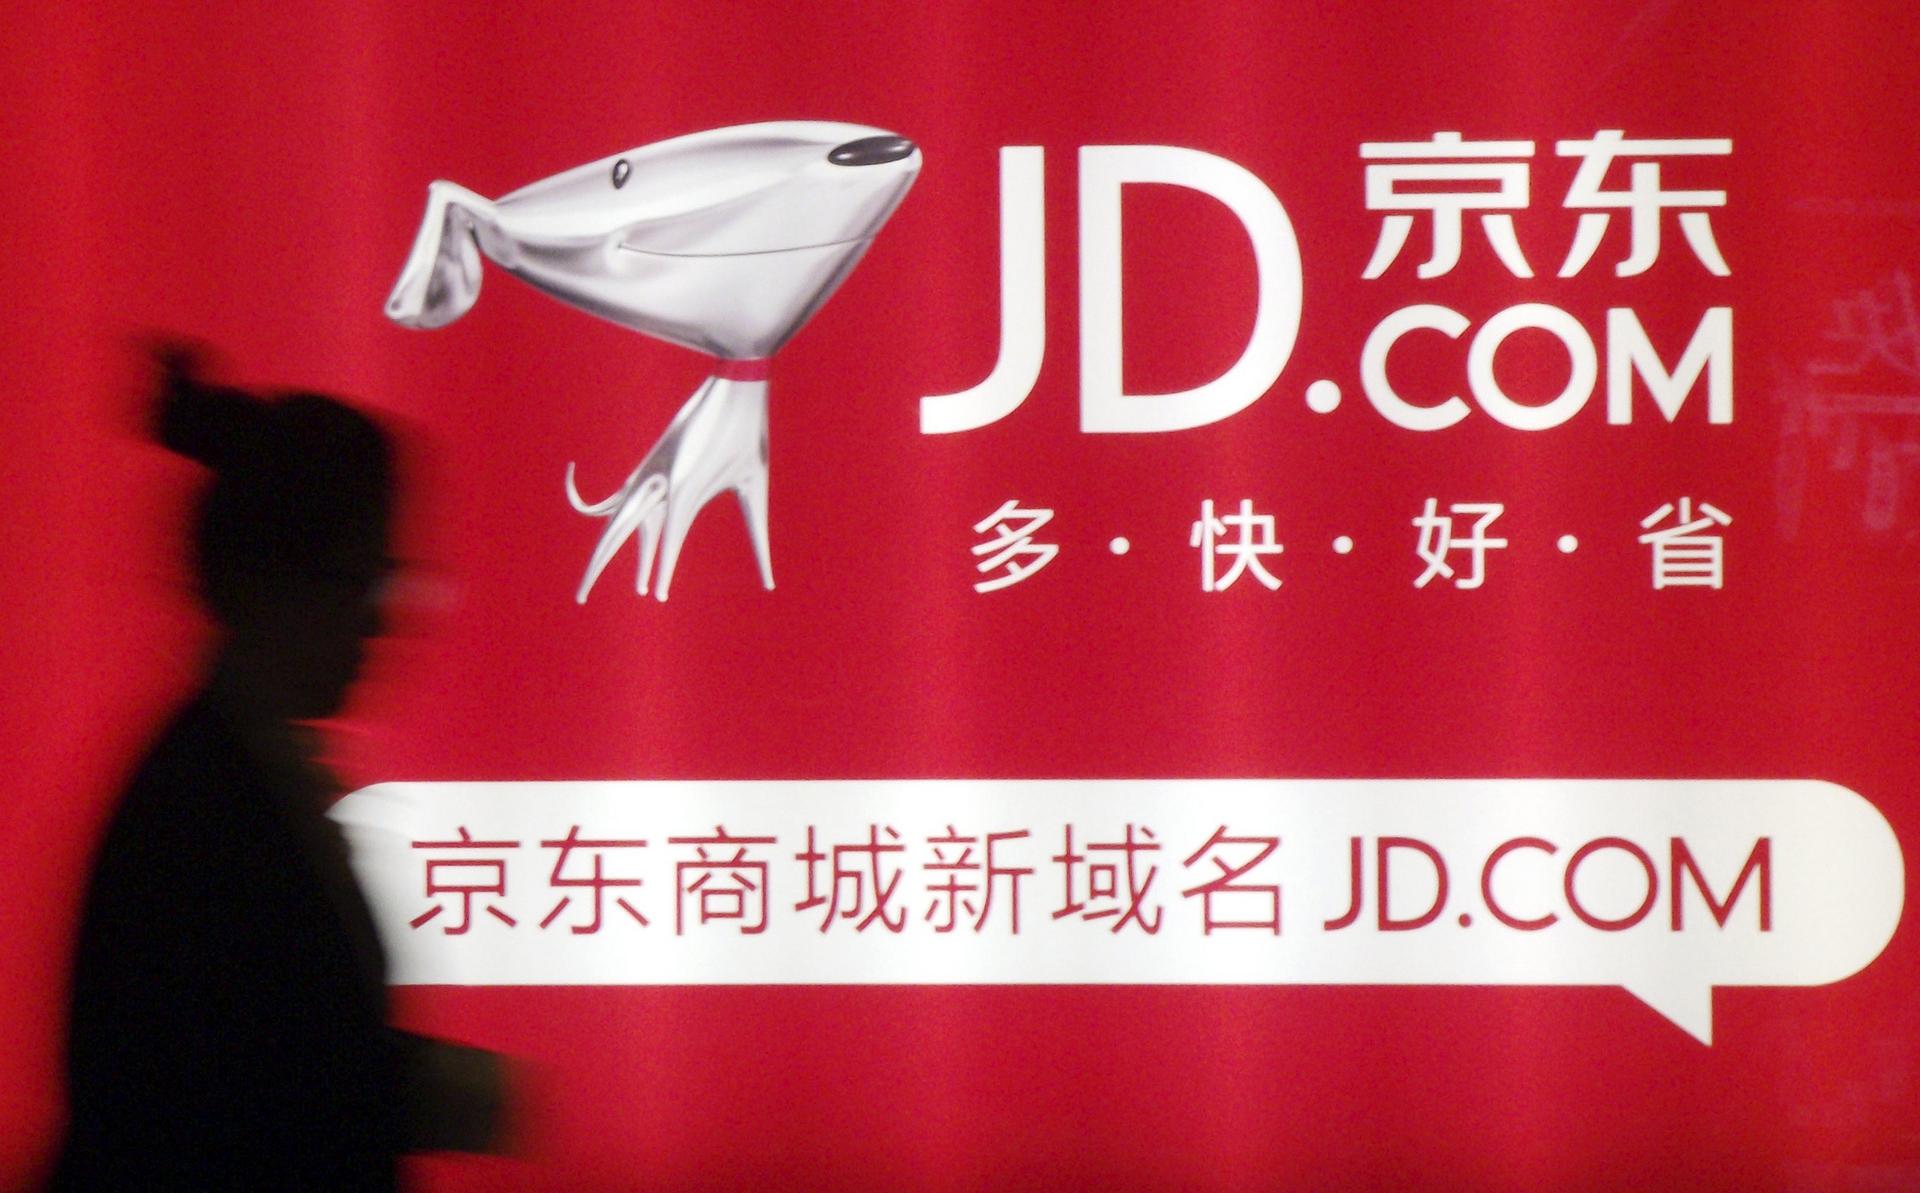 The value of goods sold by JD.com jumped 107 per cent in the second quarter from last year as revenue surged 64 per cent. Photo: Reuters